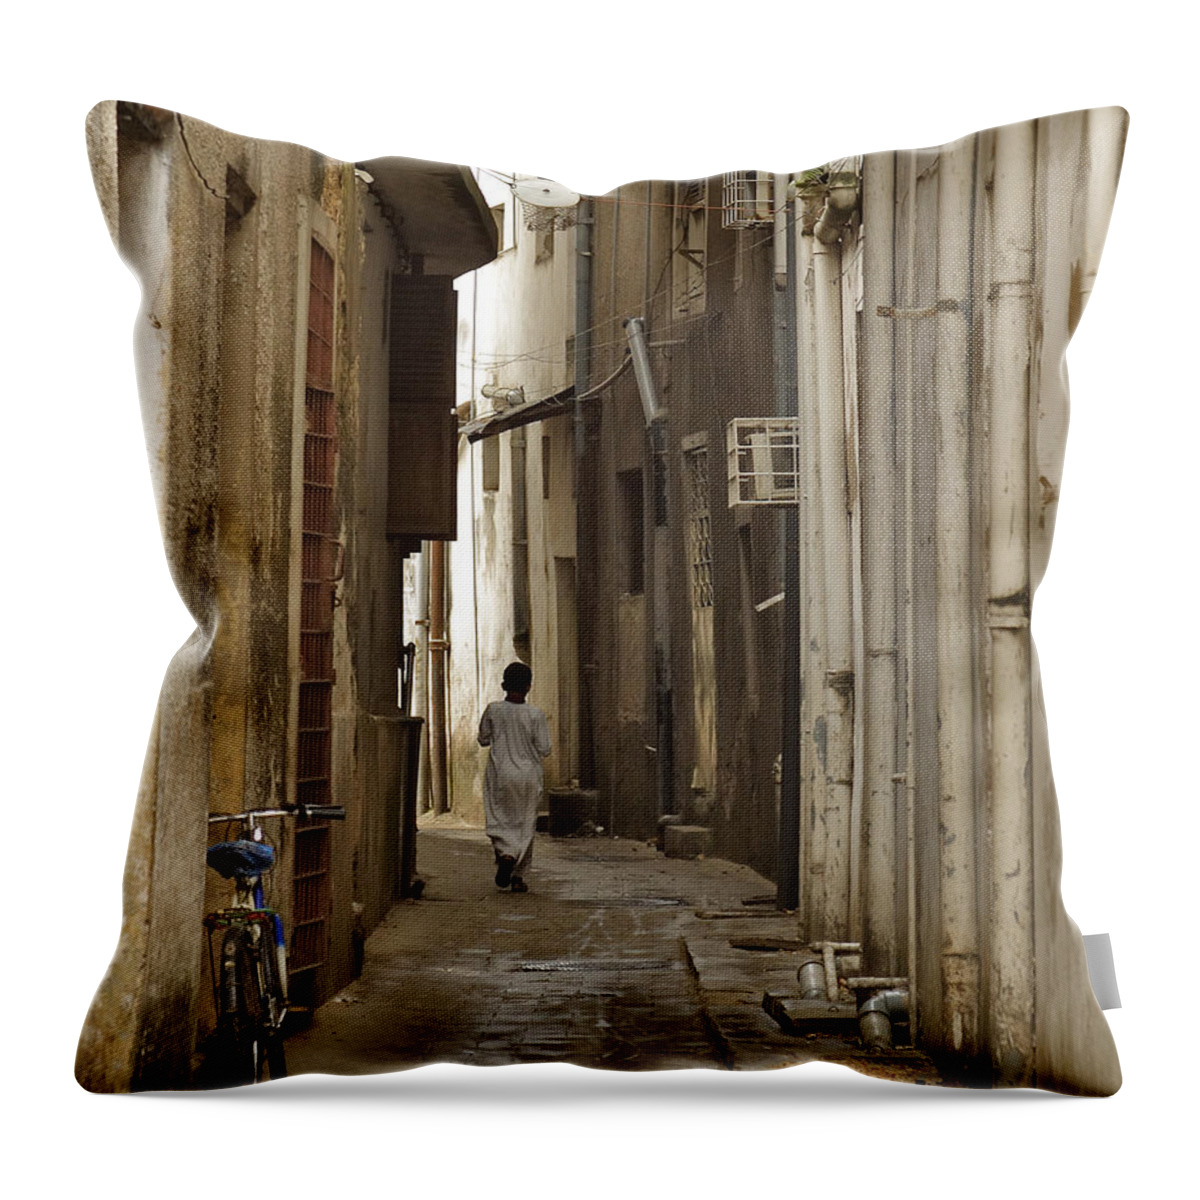 3scape Throw Pillow featuring the photograph Stone Town by Adam Romanowicz